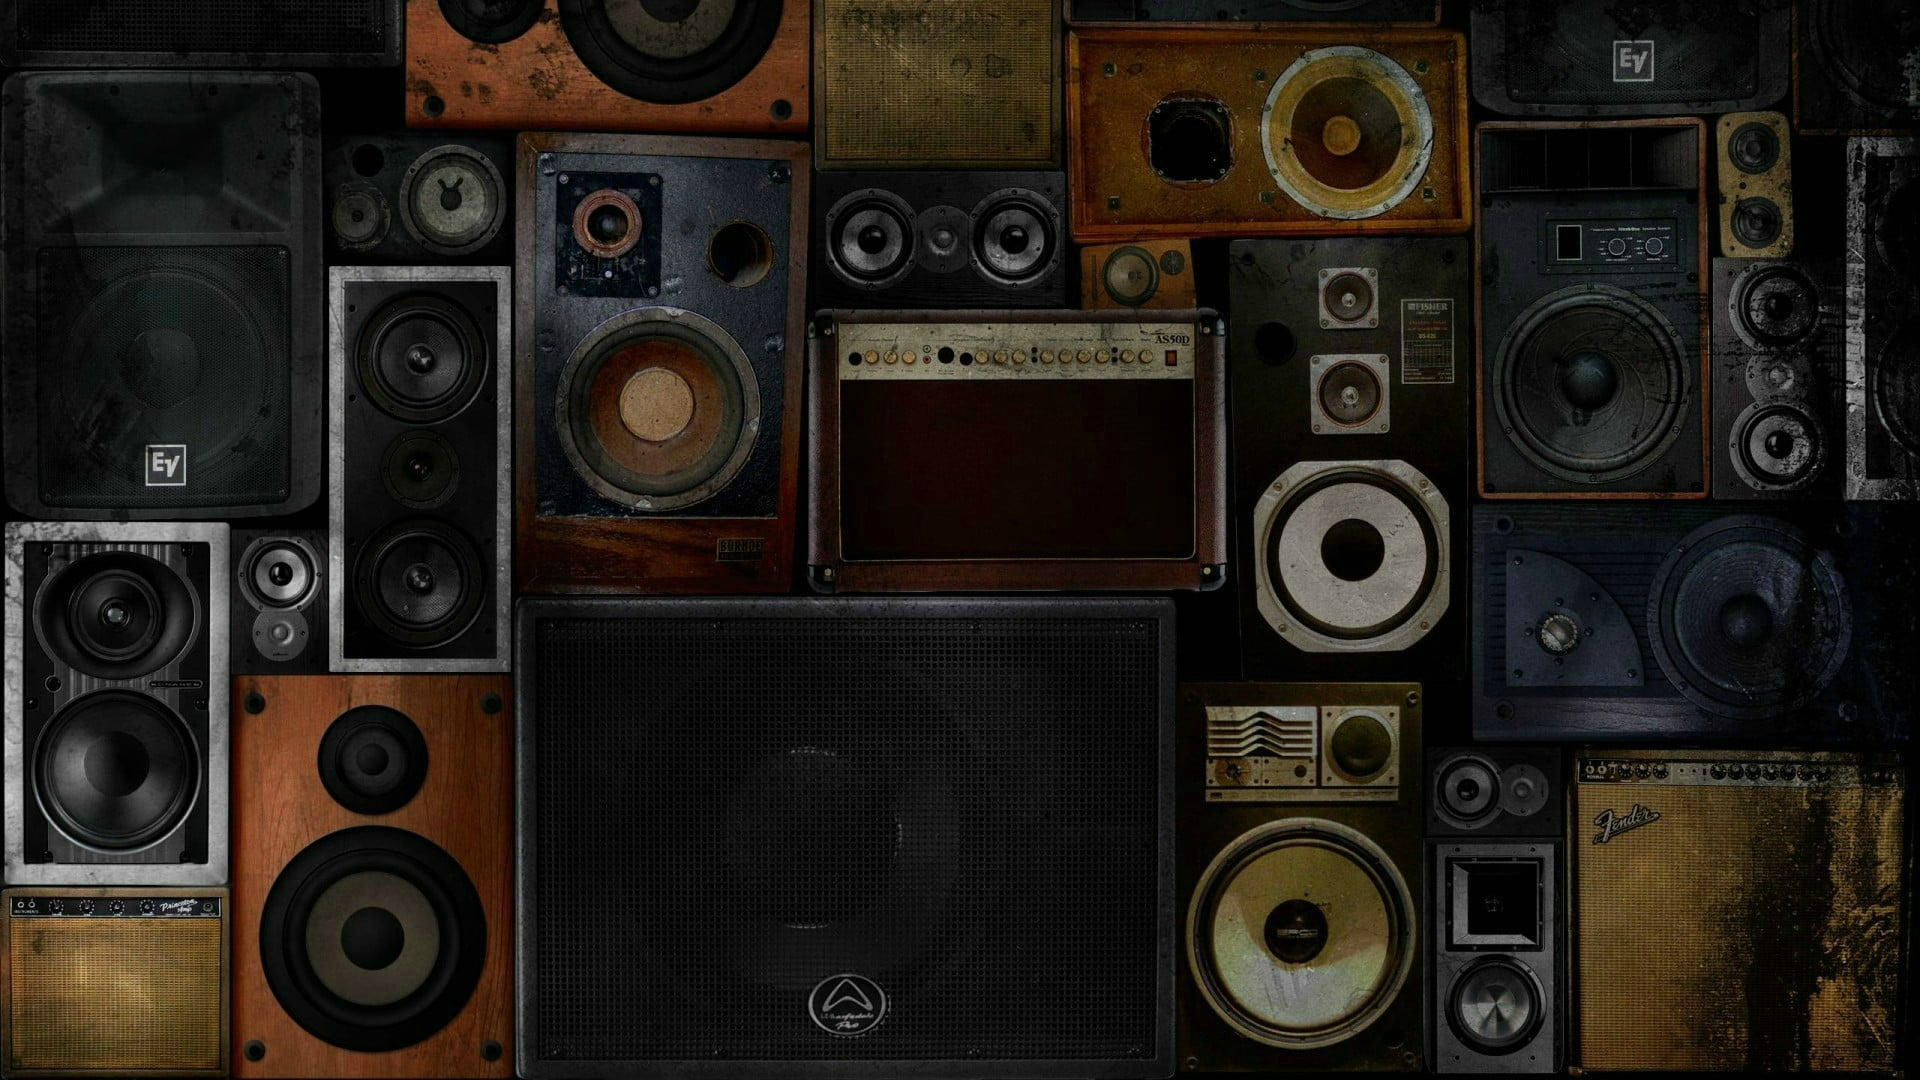 Vintage home appliance audio component, speakers, technology wallpaper